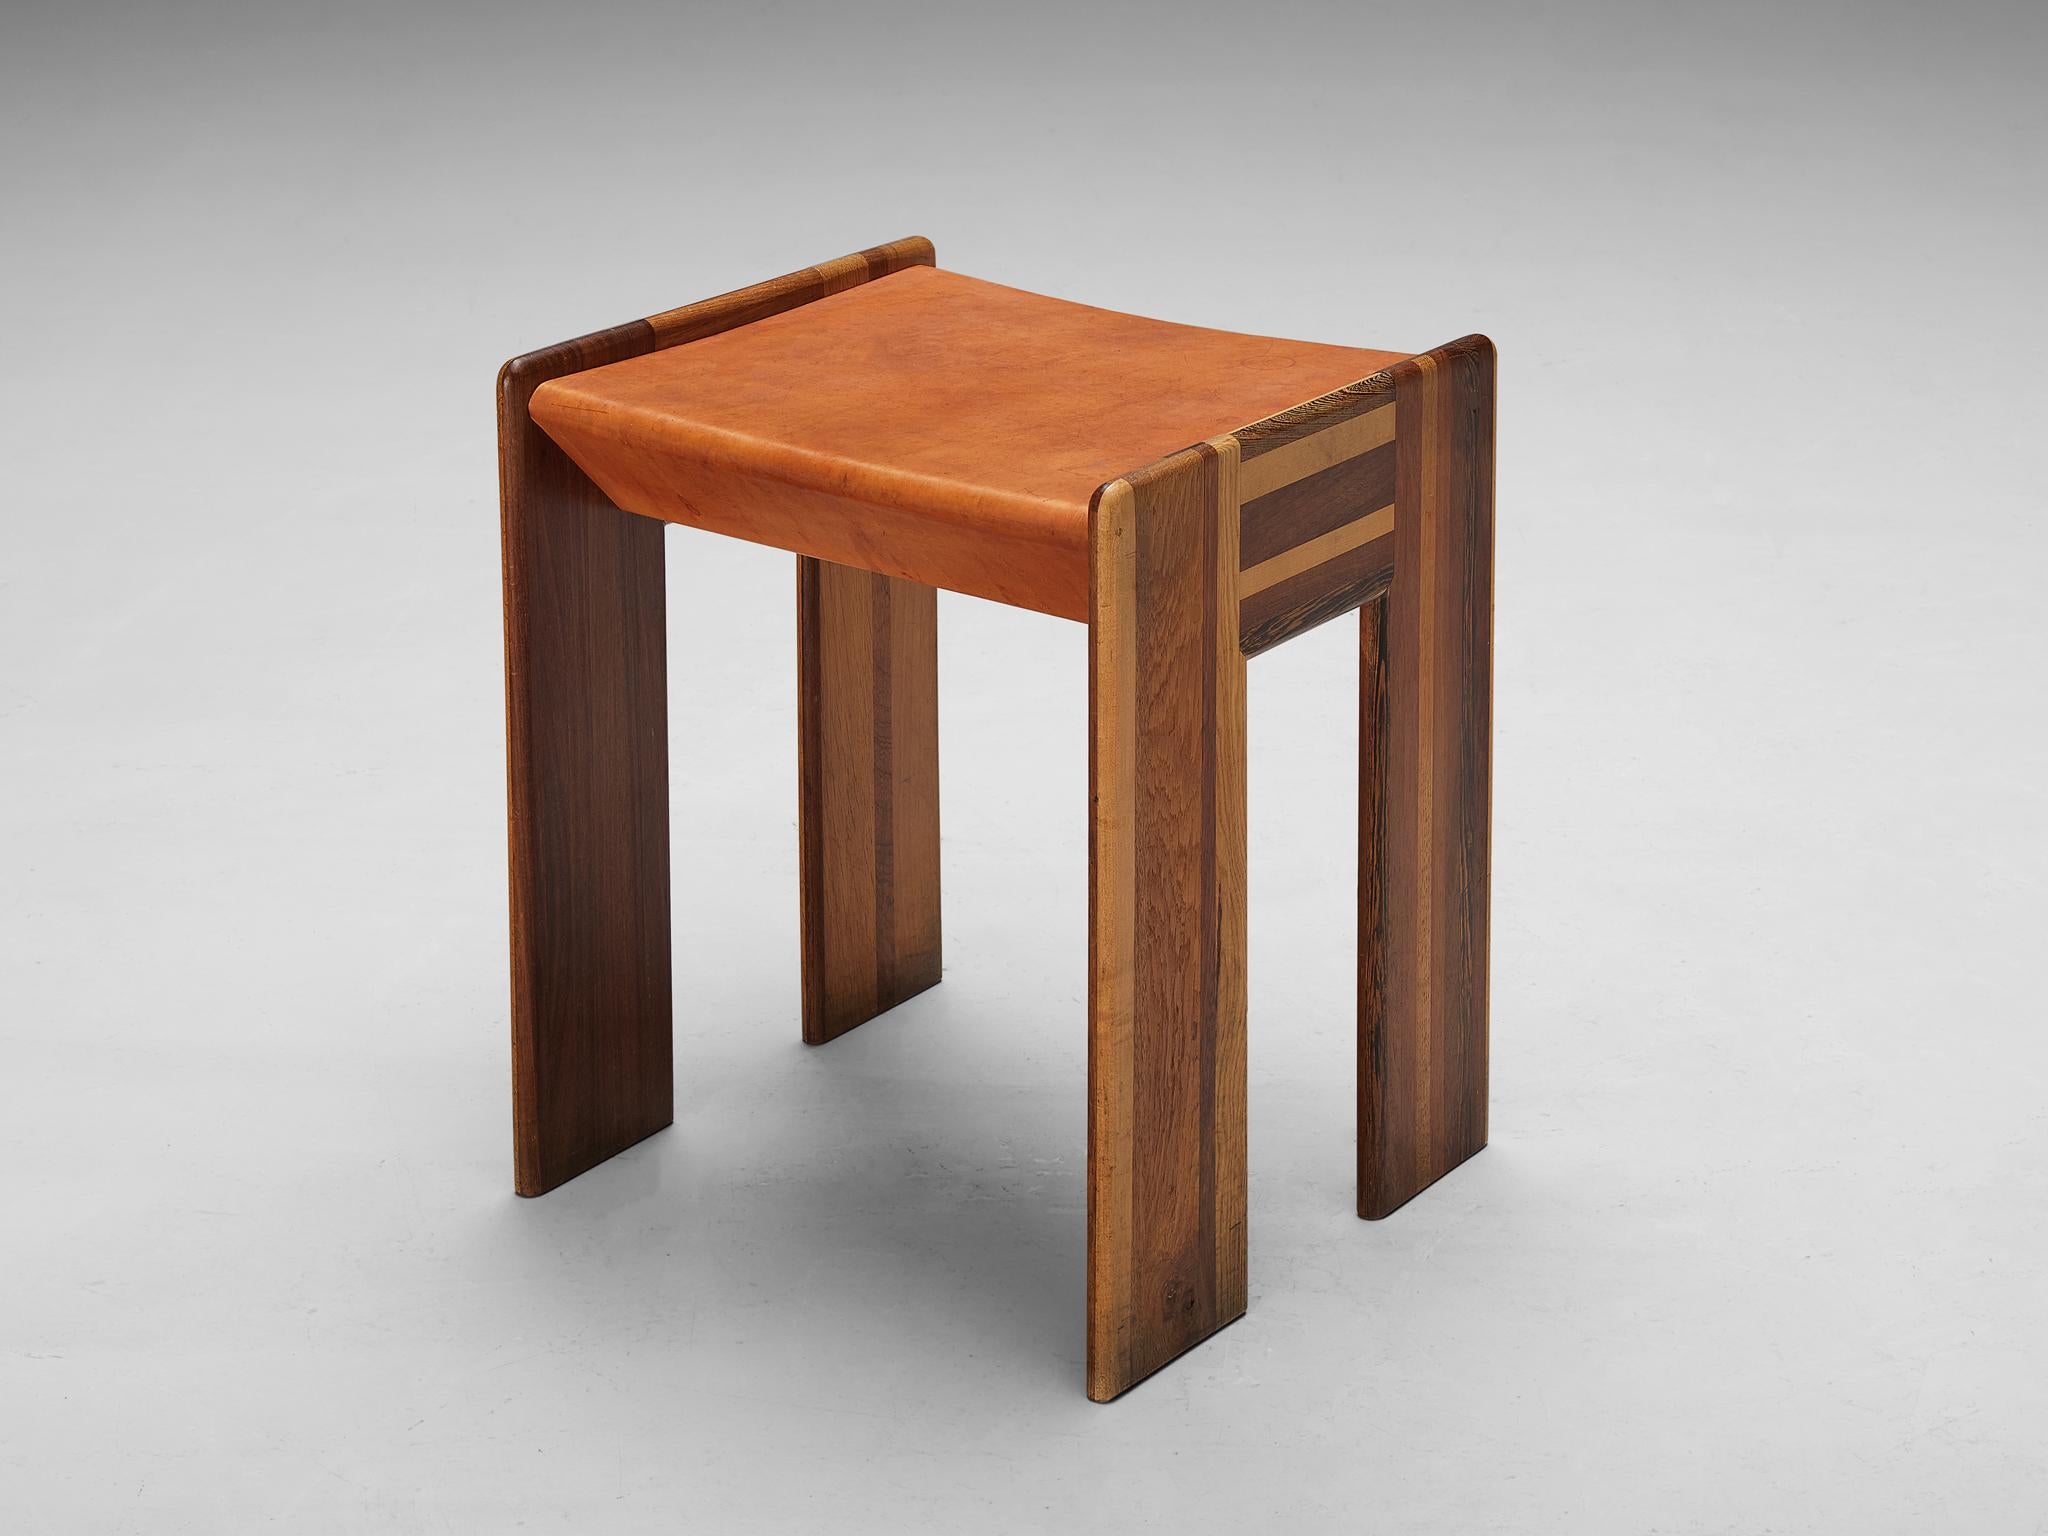 Afra & Tobia Scarpa 'Benetton' Stools in Mixed Wood and Cognac Leather For Sale 3